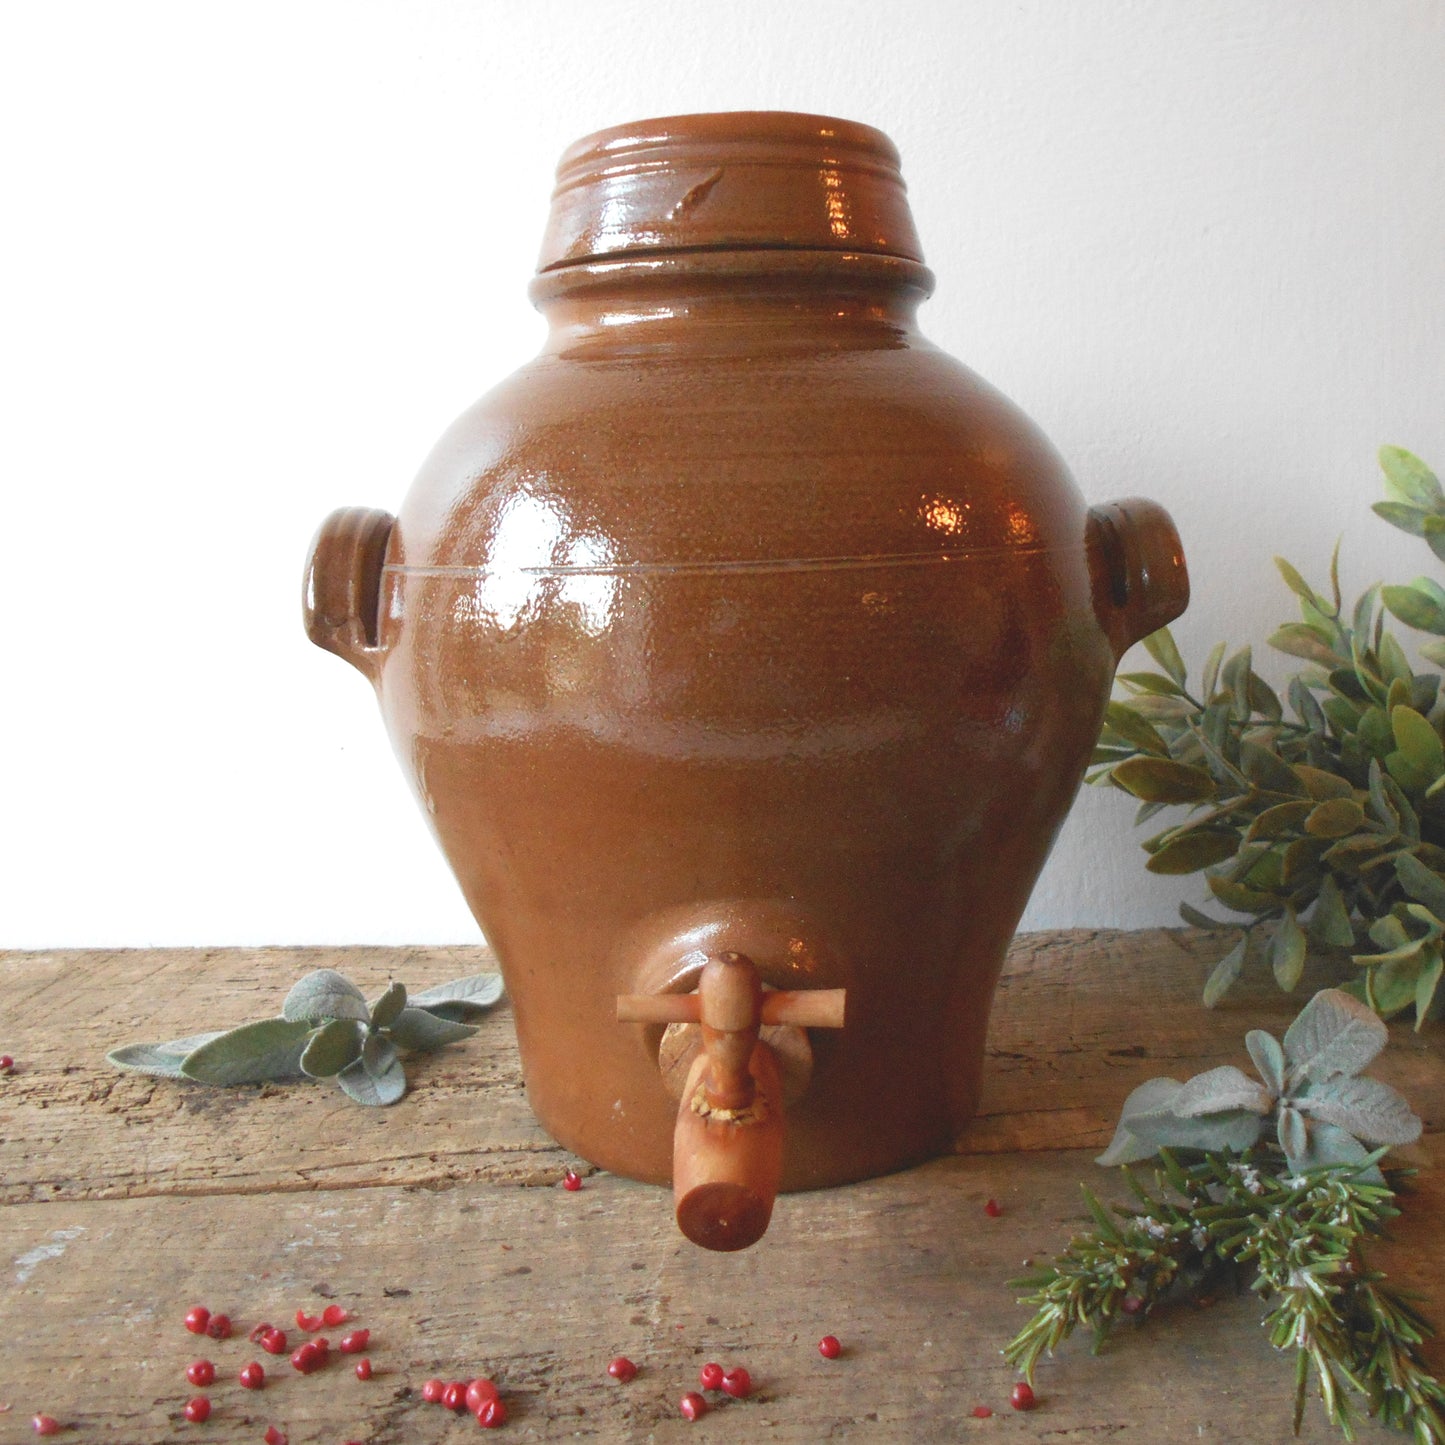 French Terracotta Oil Jar. Large Clay Oil/Vinegar Jar Handles and Tap/Cork. from Tiggy & Pip - €162.00! Shop now at Tiggy and Pip